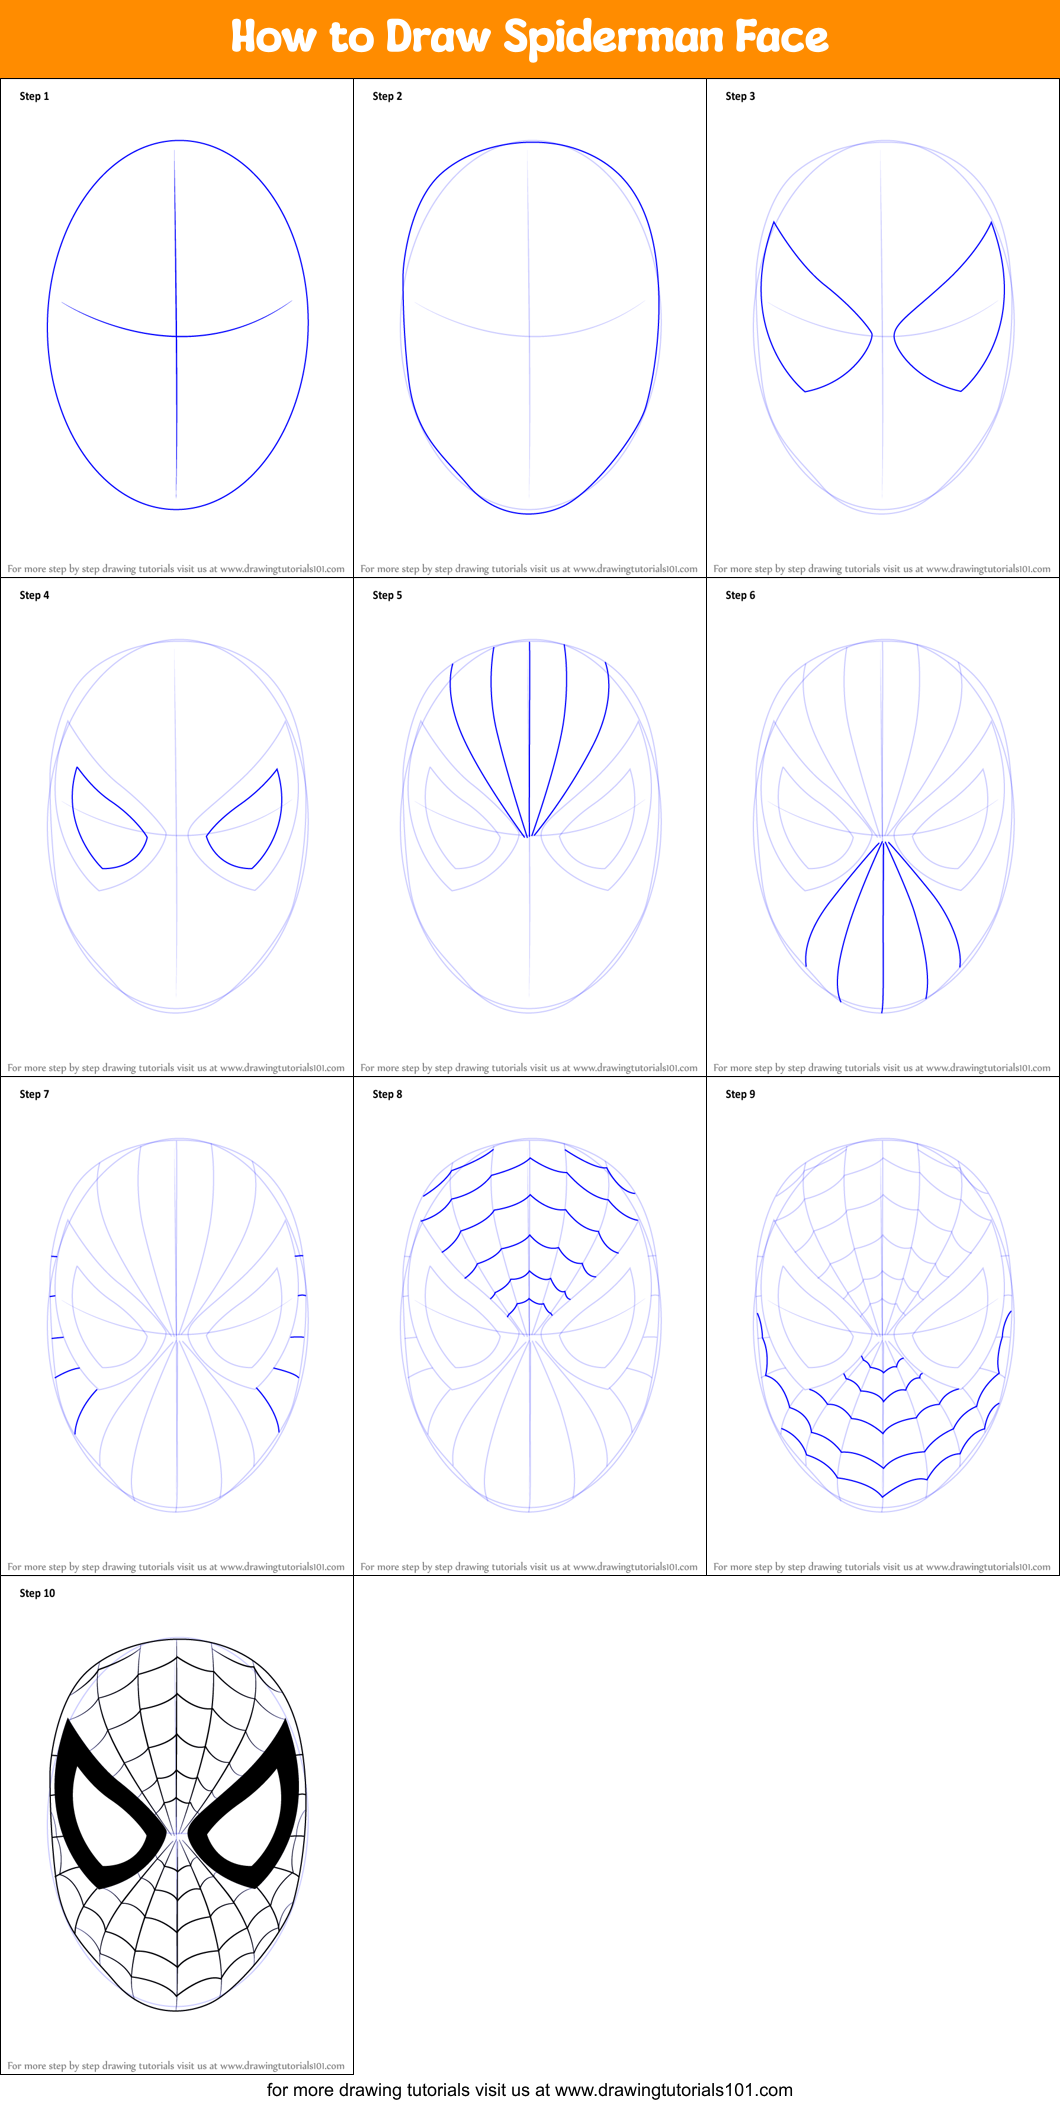 How to Draw Spider-Man VIDEO & Step-by-Step Pictures